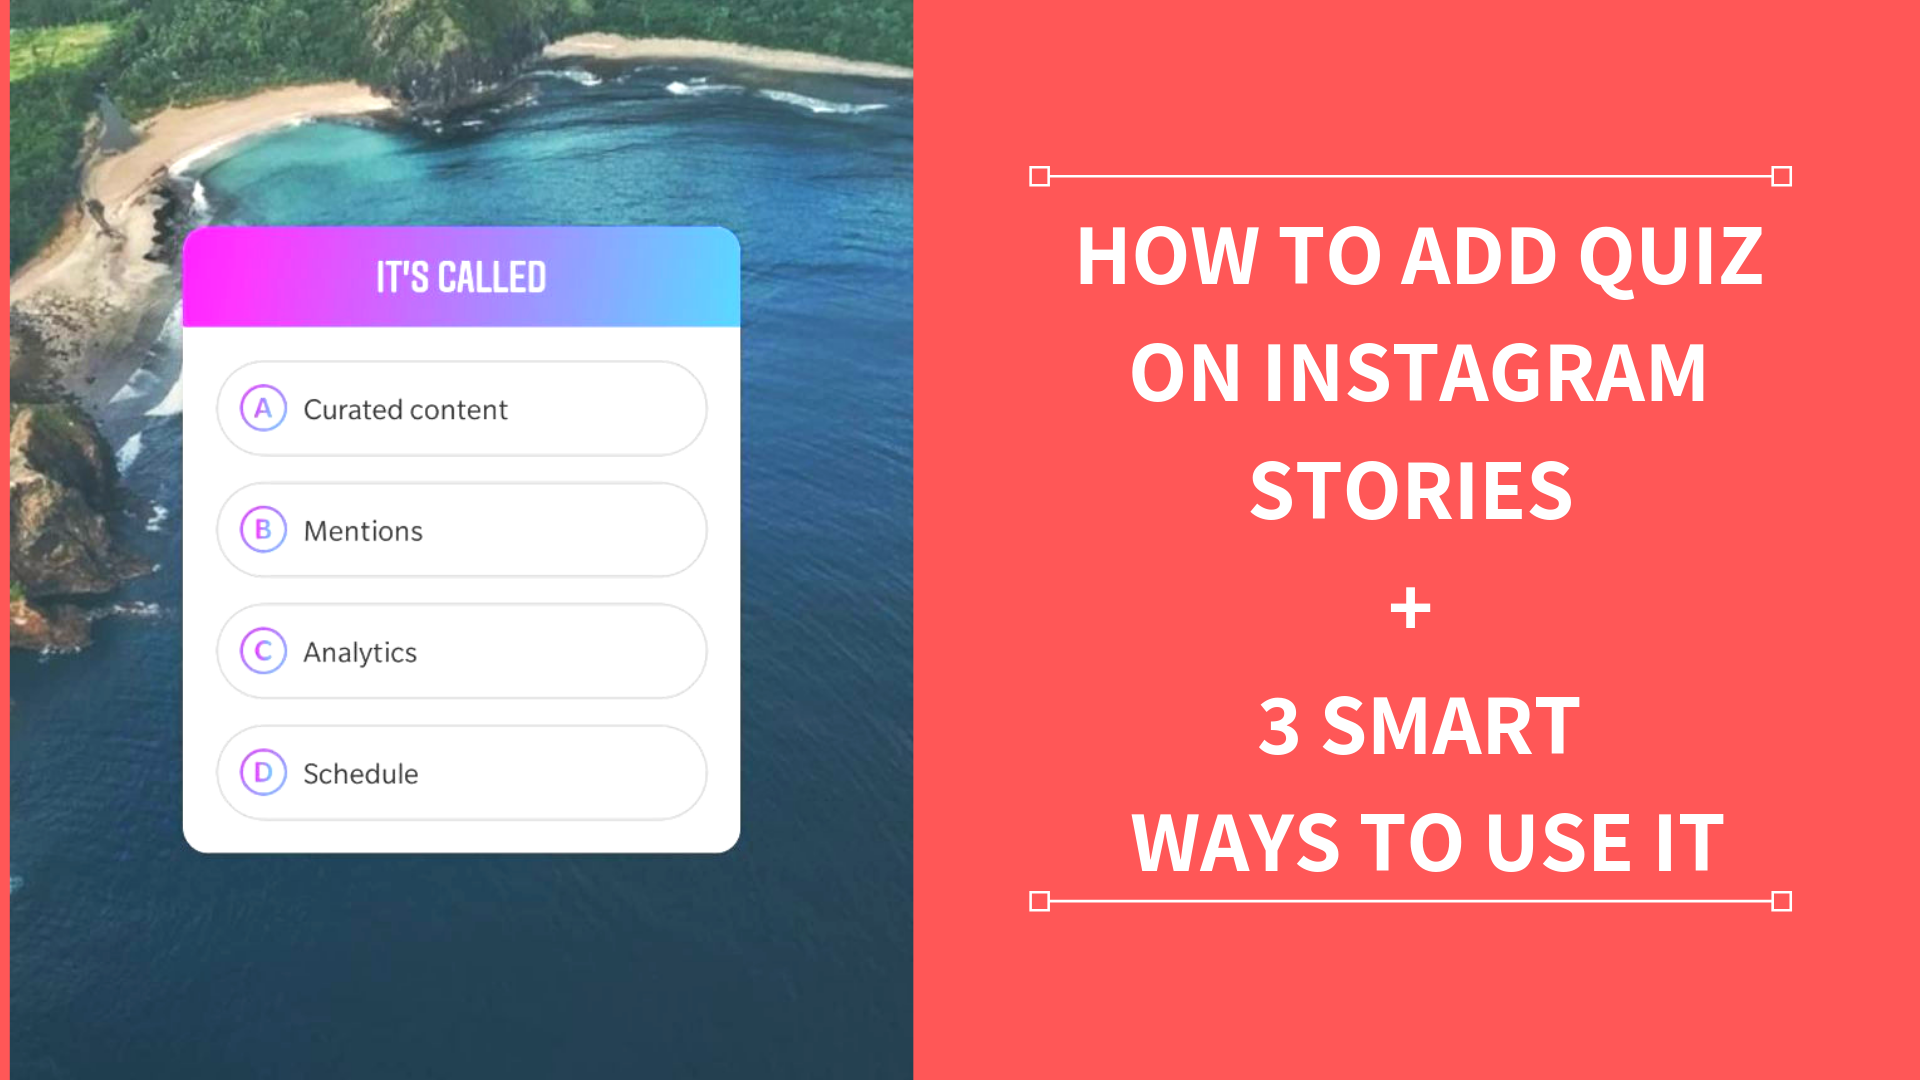 How To Add Quiz On Instagram Stories 3 Smart Ways To Use It By Crowdfire Crowdfire The Official Crowdfire Blog